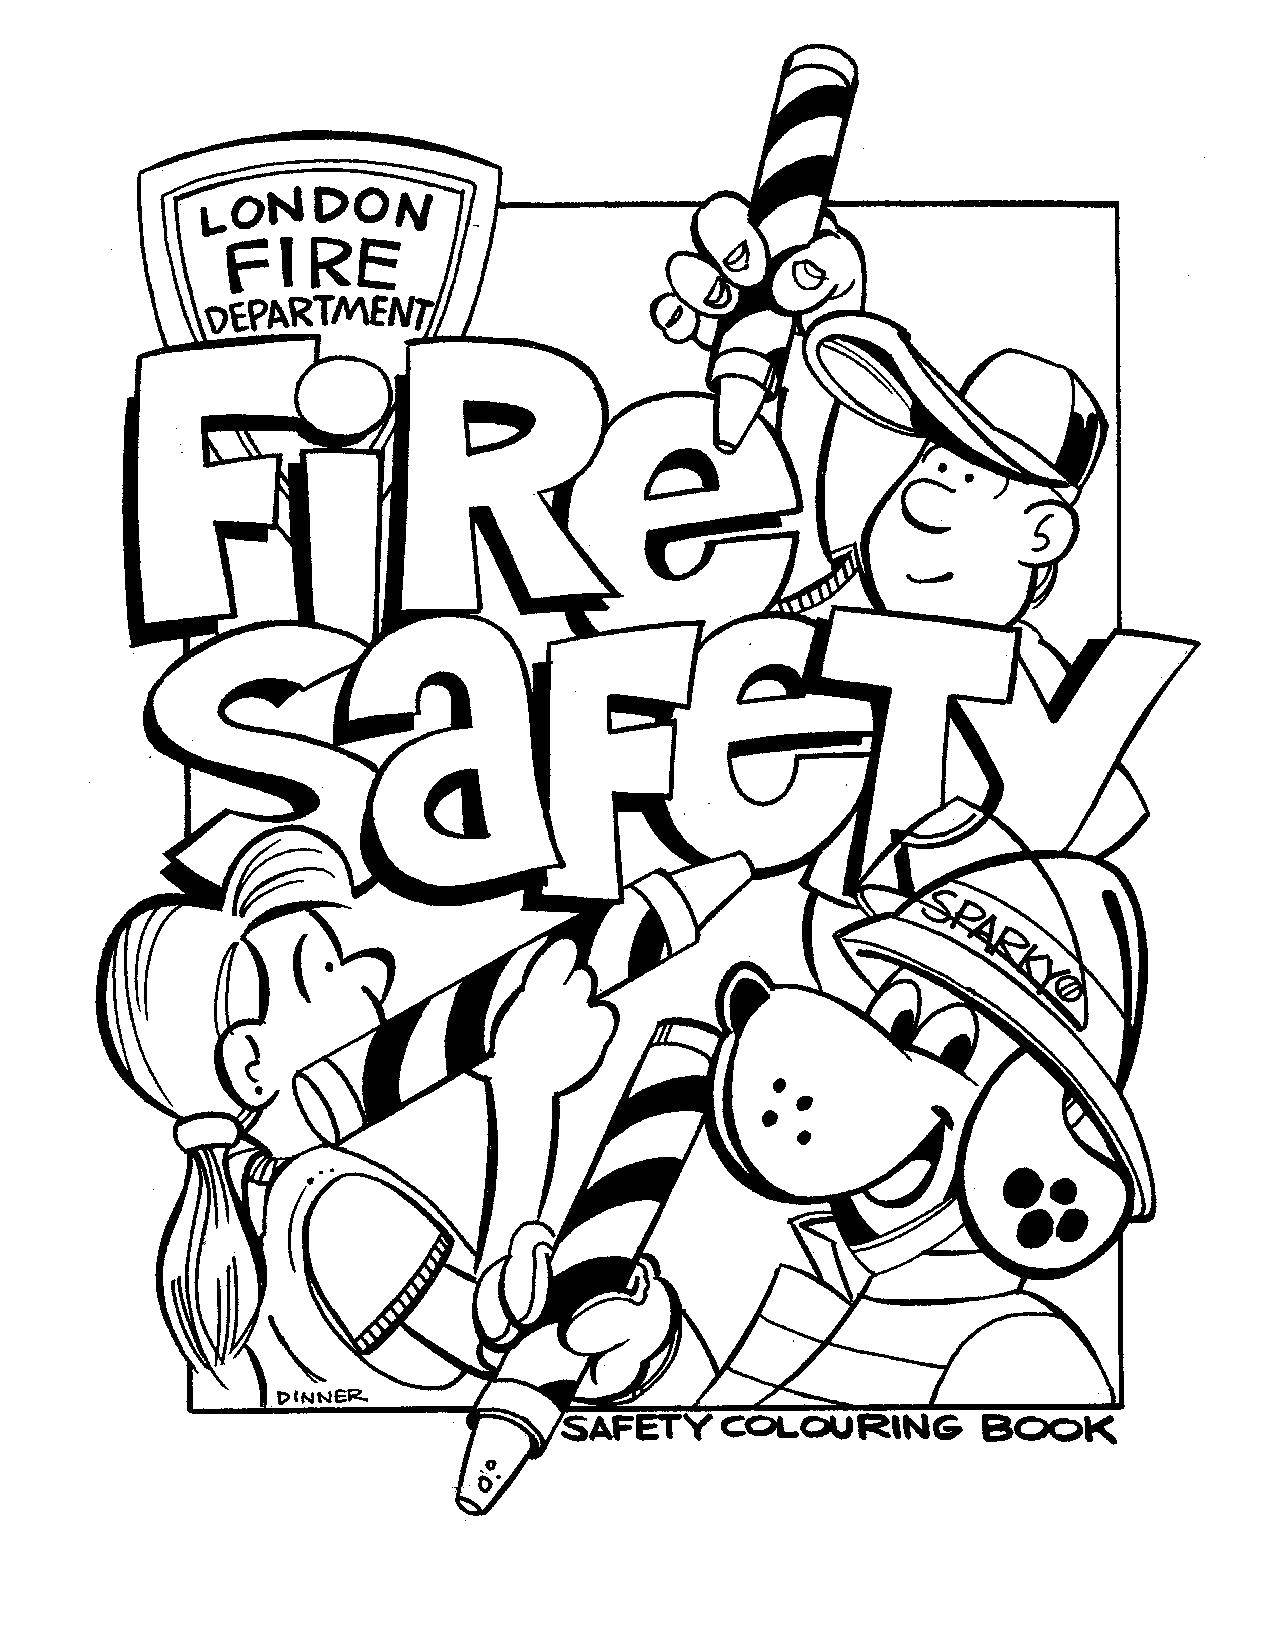 Coloring Fire safety. Category Fire. Tags:  fire, fire, fire.